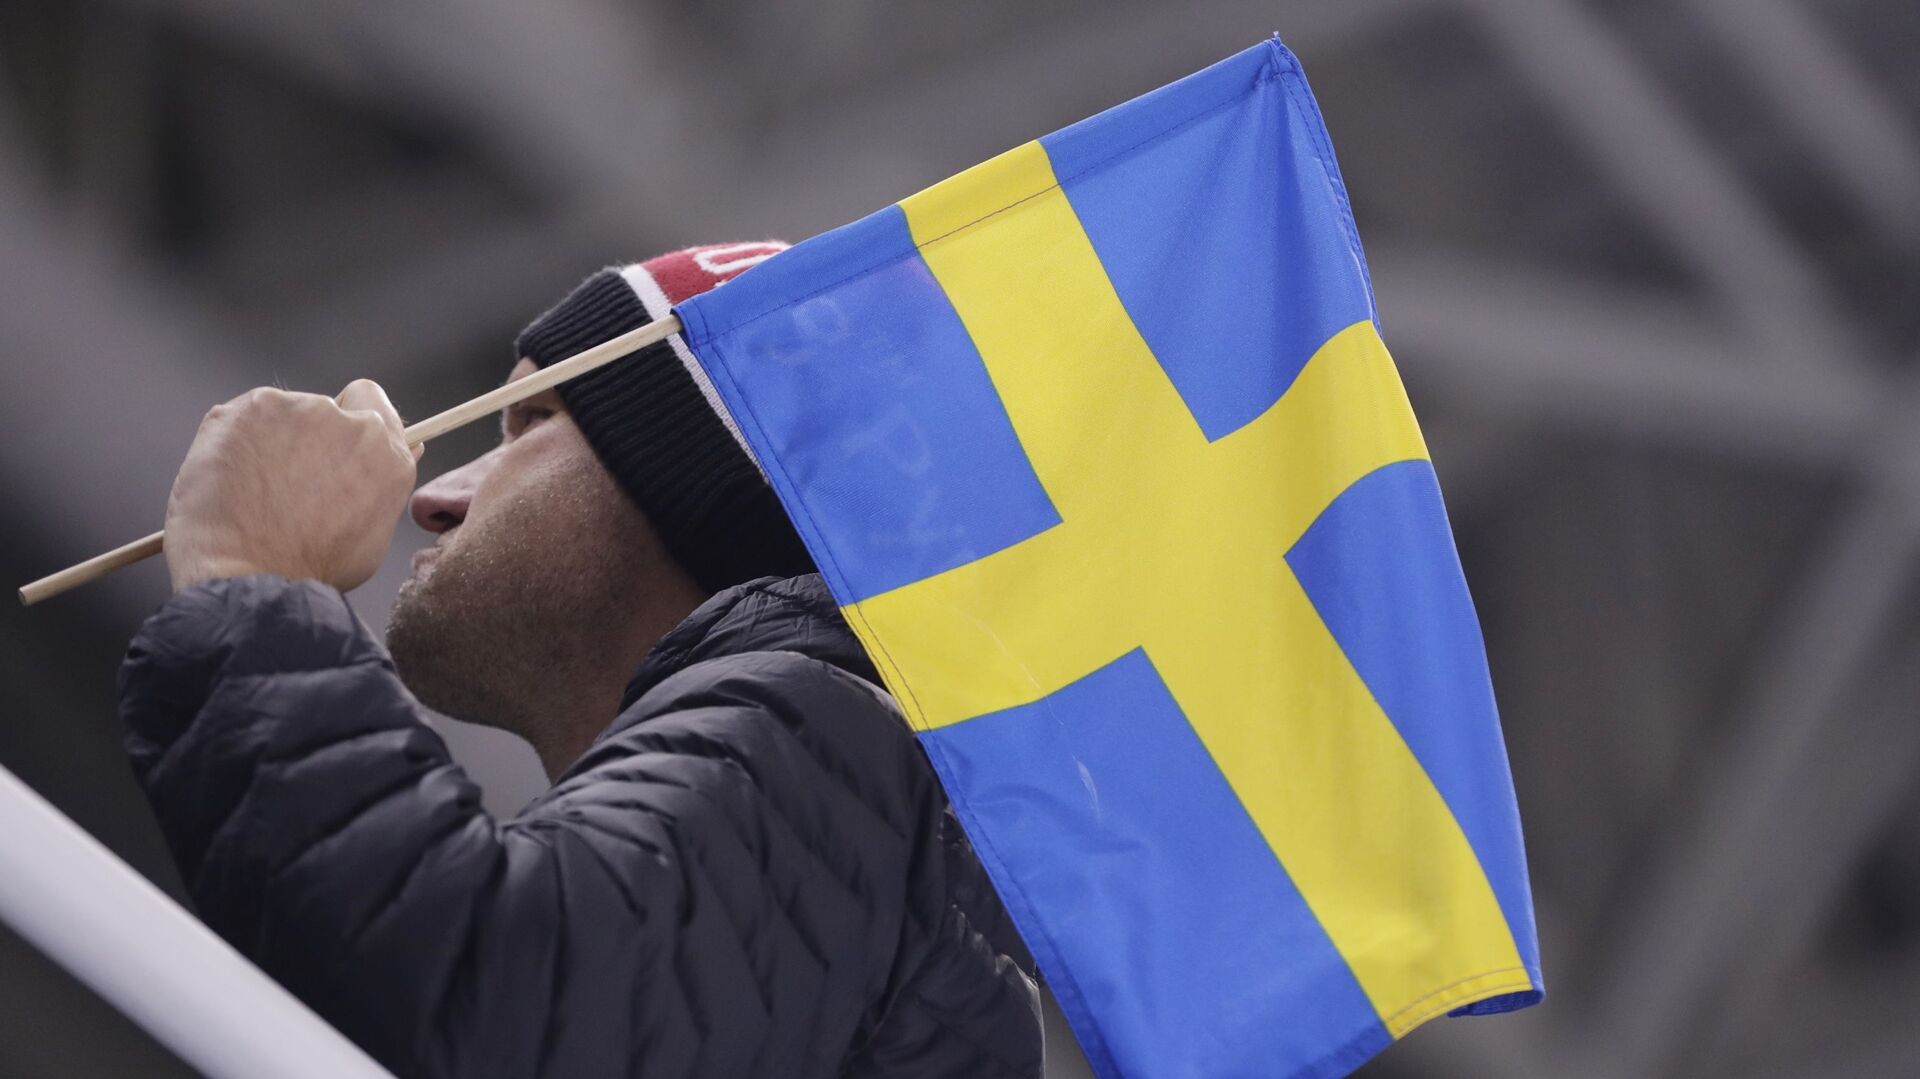 A man poses with a Swedish flag before the preliminary round of the men's hockey game between Sweden and Finland at the 2018 Winter Olympics in Gangneung, South Korea, Sunday, Feb. 18, 2018 - Sputnik International, 1920, 11.02.2021